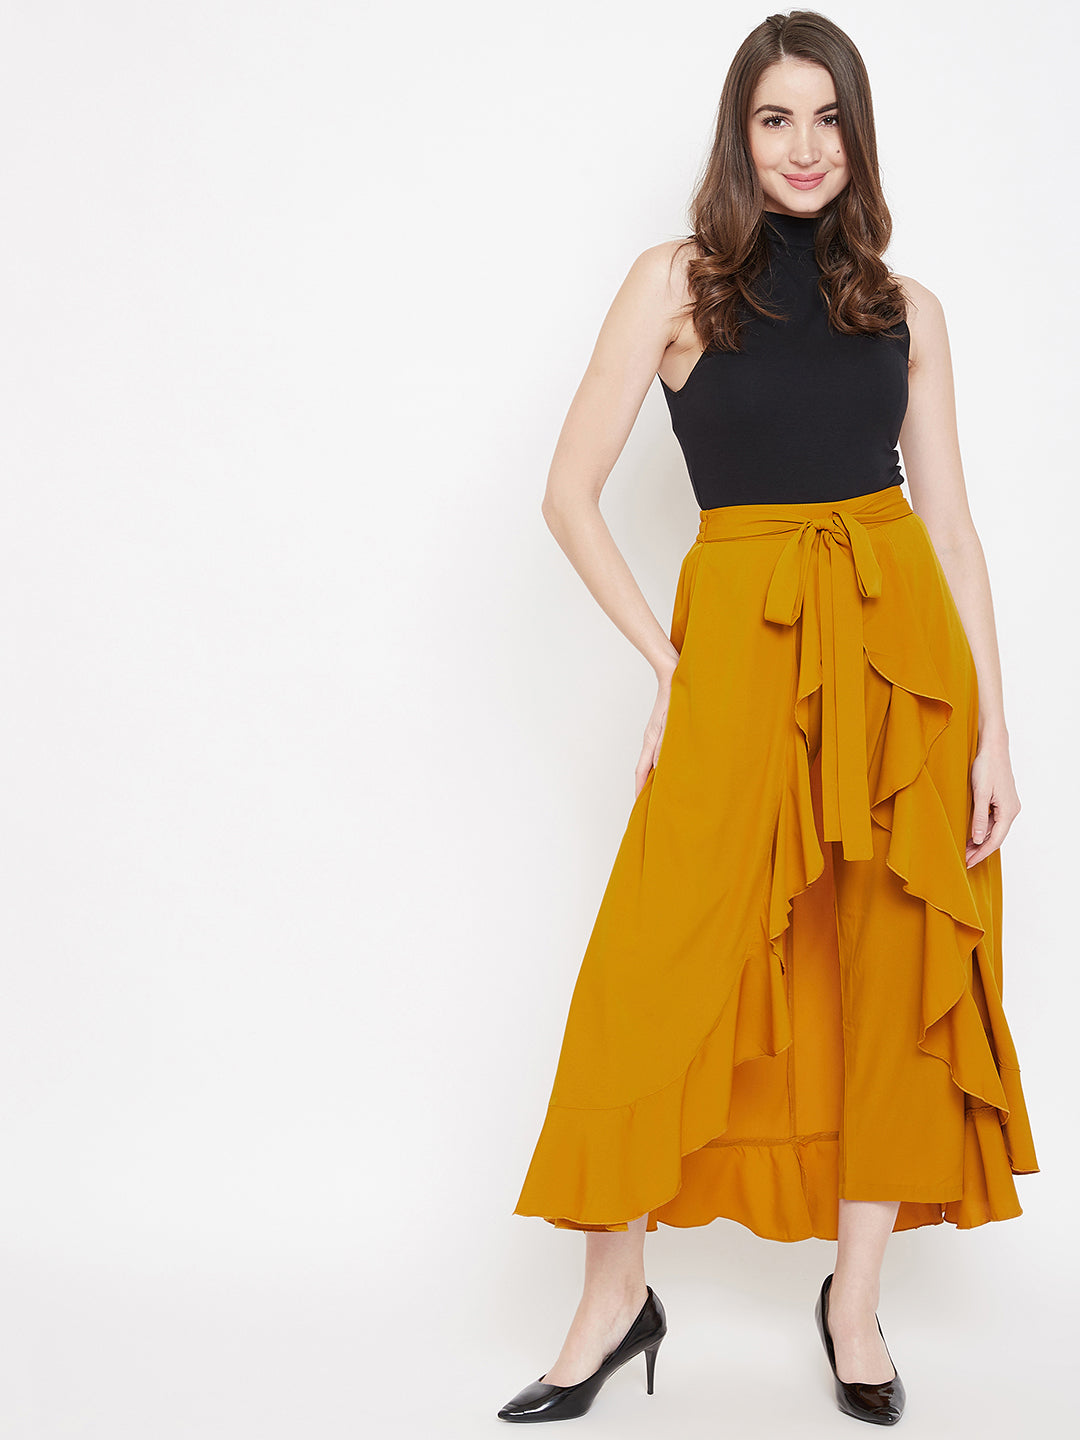 Berrylush Women Solid Mustard Yellow Waist Tie-Up High-Low Flared Maxi Skirt with Attached Trousers